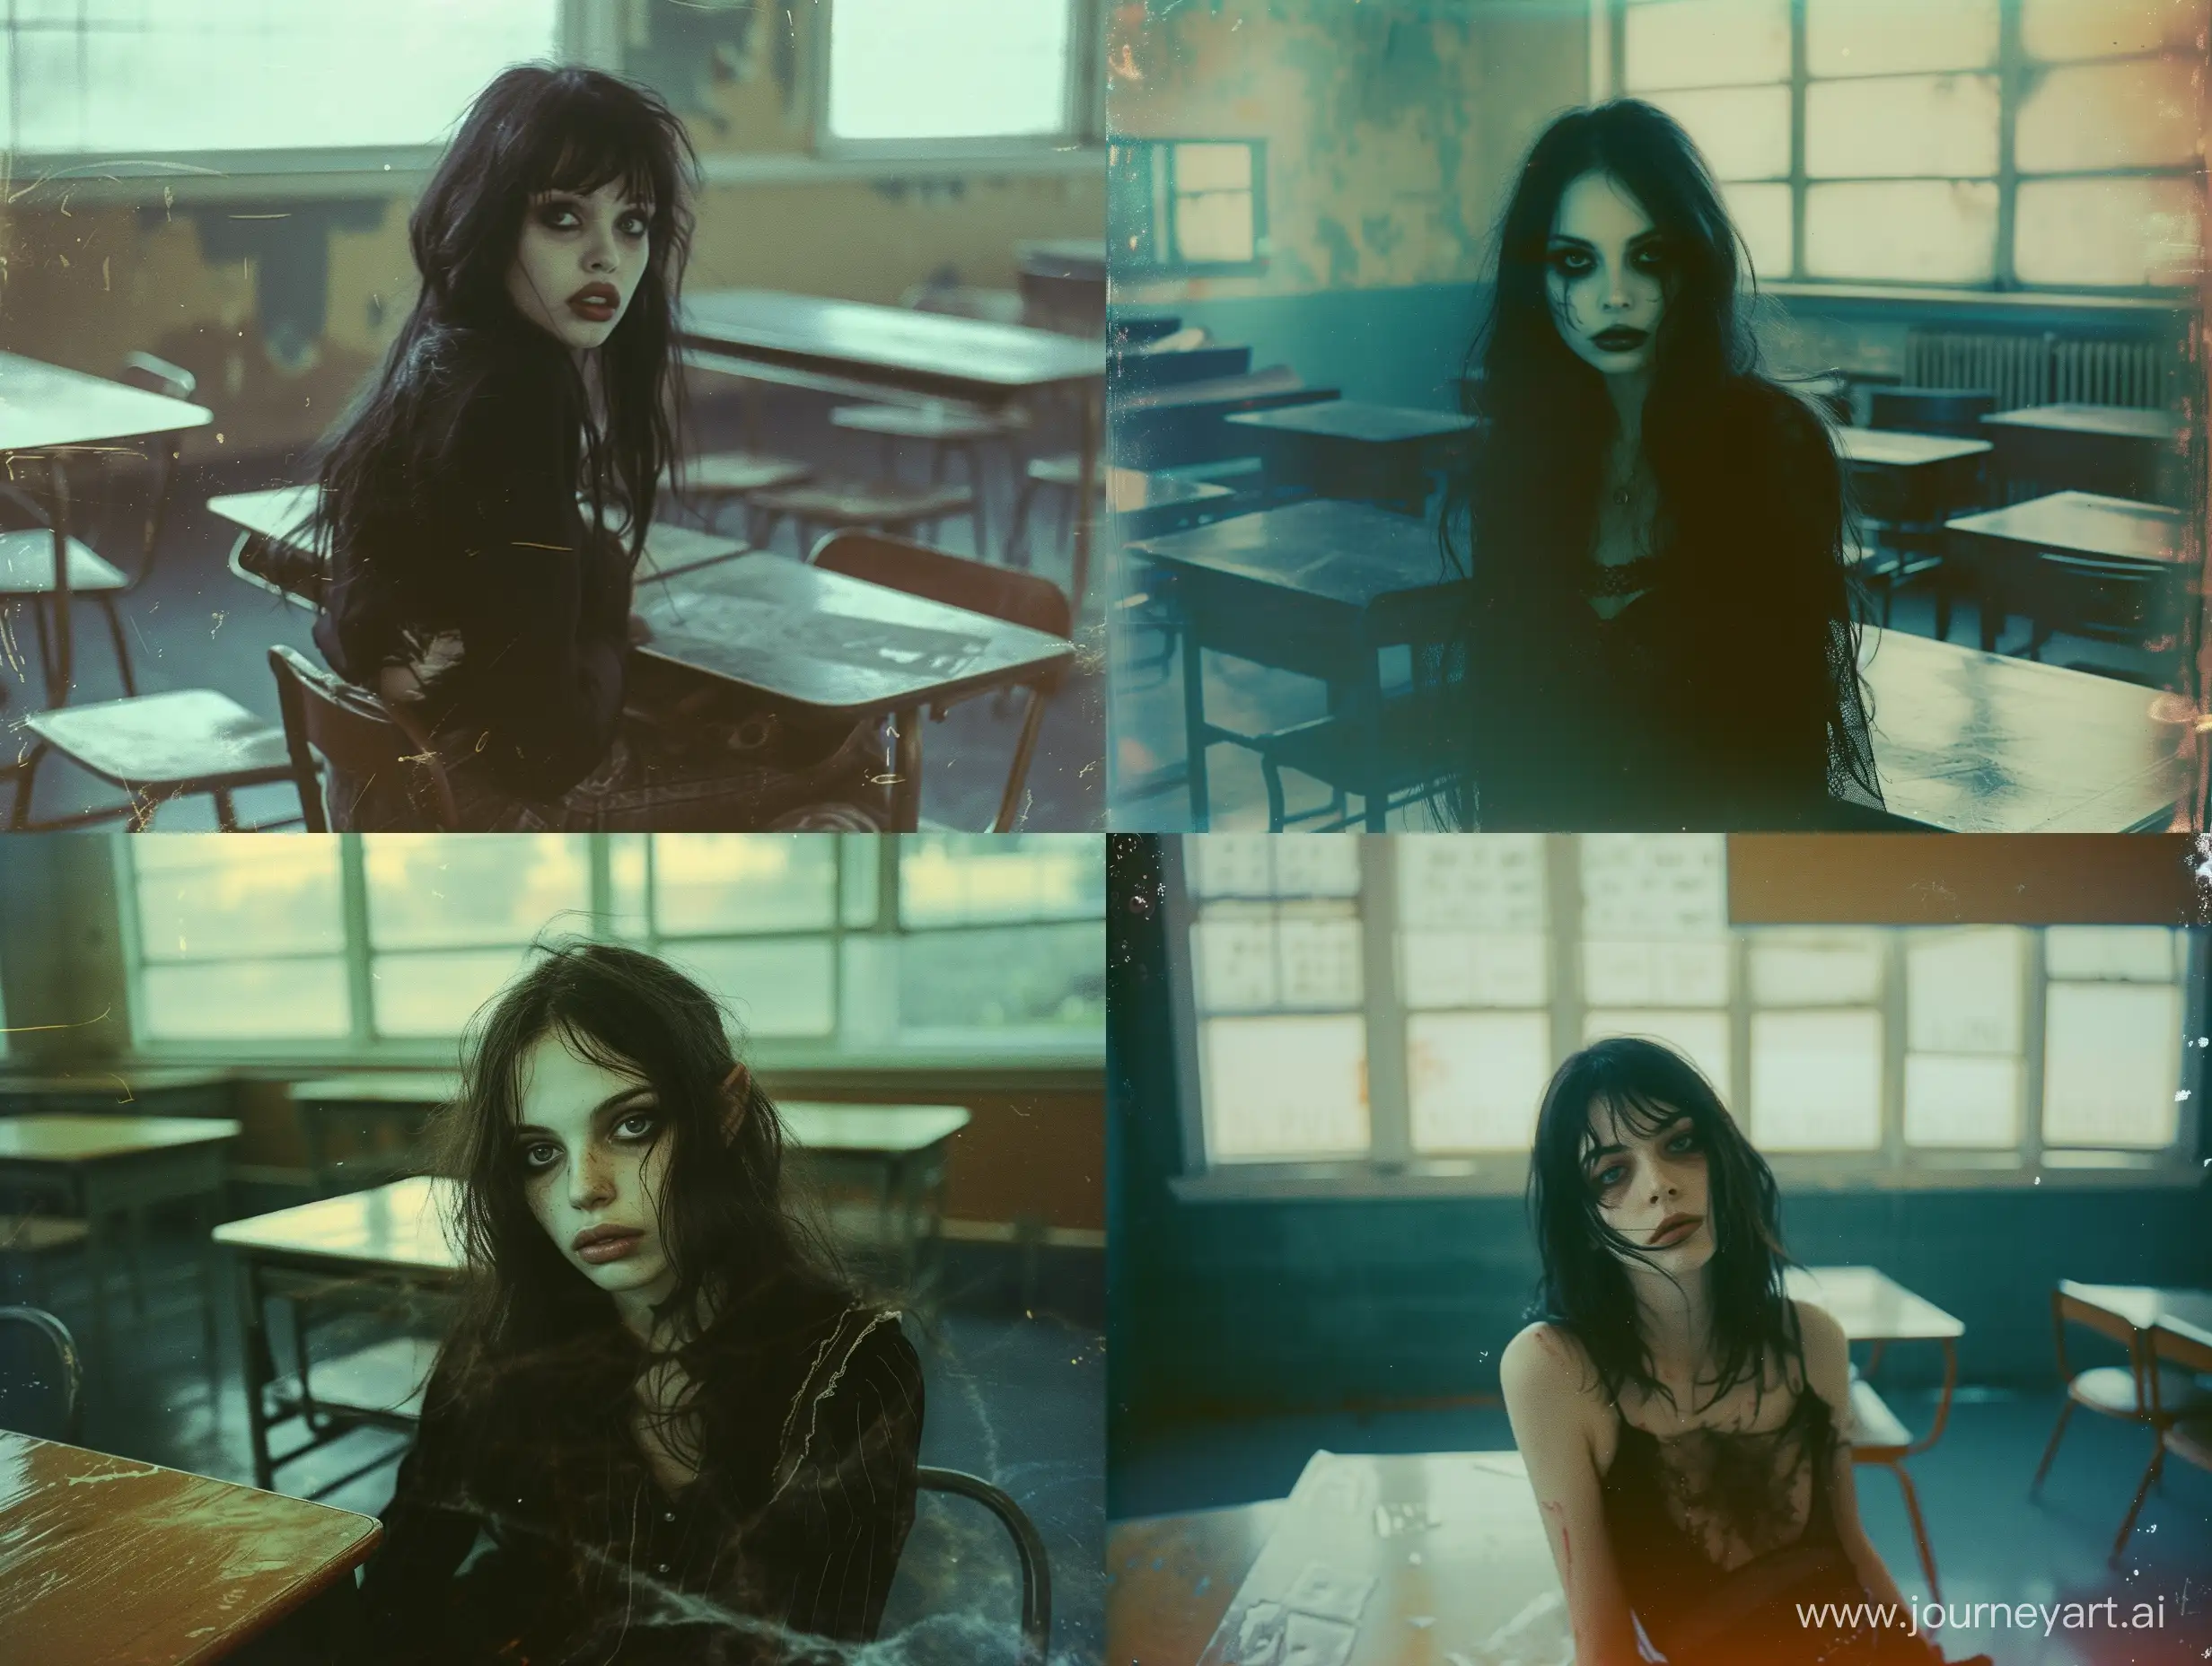 a vampire woman sitting inside a classroom, photography taken on a disposable camera, natural lighting, looking at the viewer, documentary photography, naturalism, noise photo effect, vibrant photo, heavy metal, rock, horror, heavy rock, close up, disturbing, pose, cover art album,

